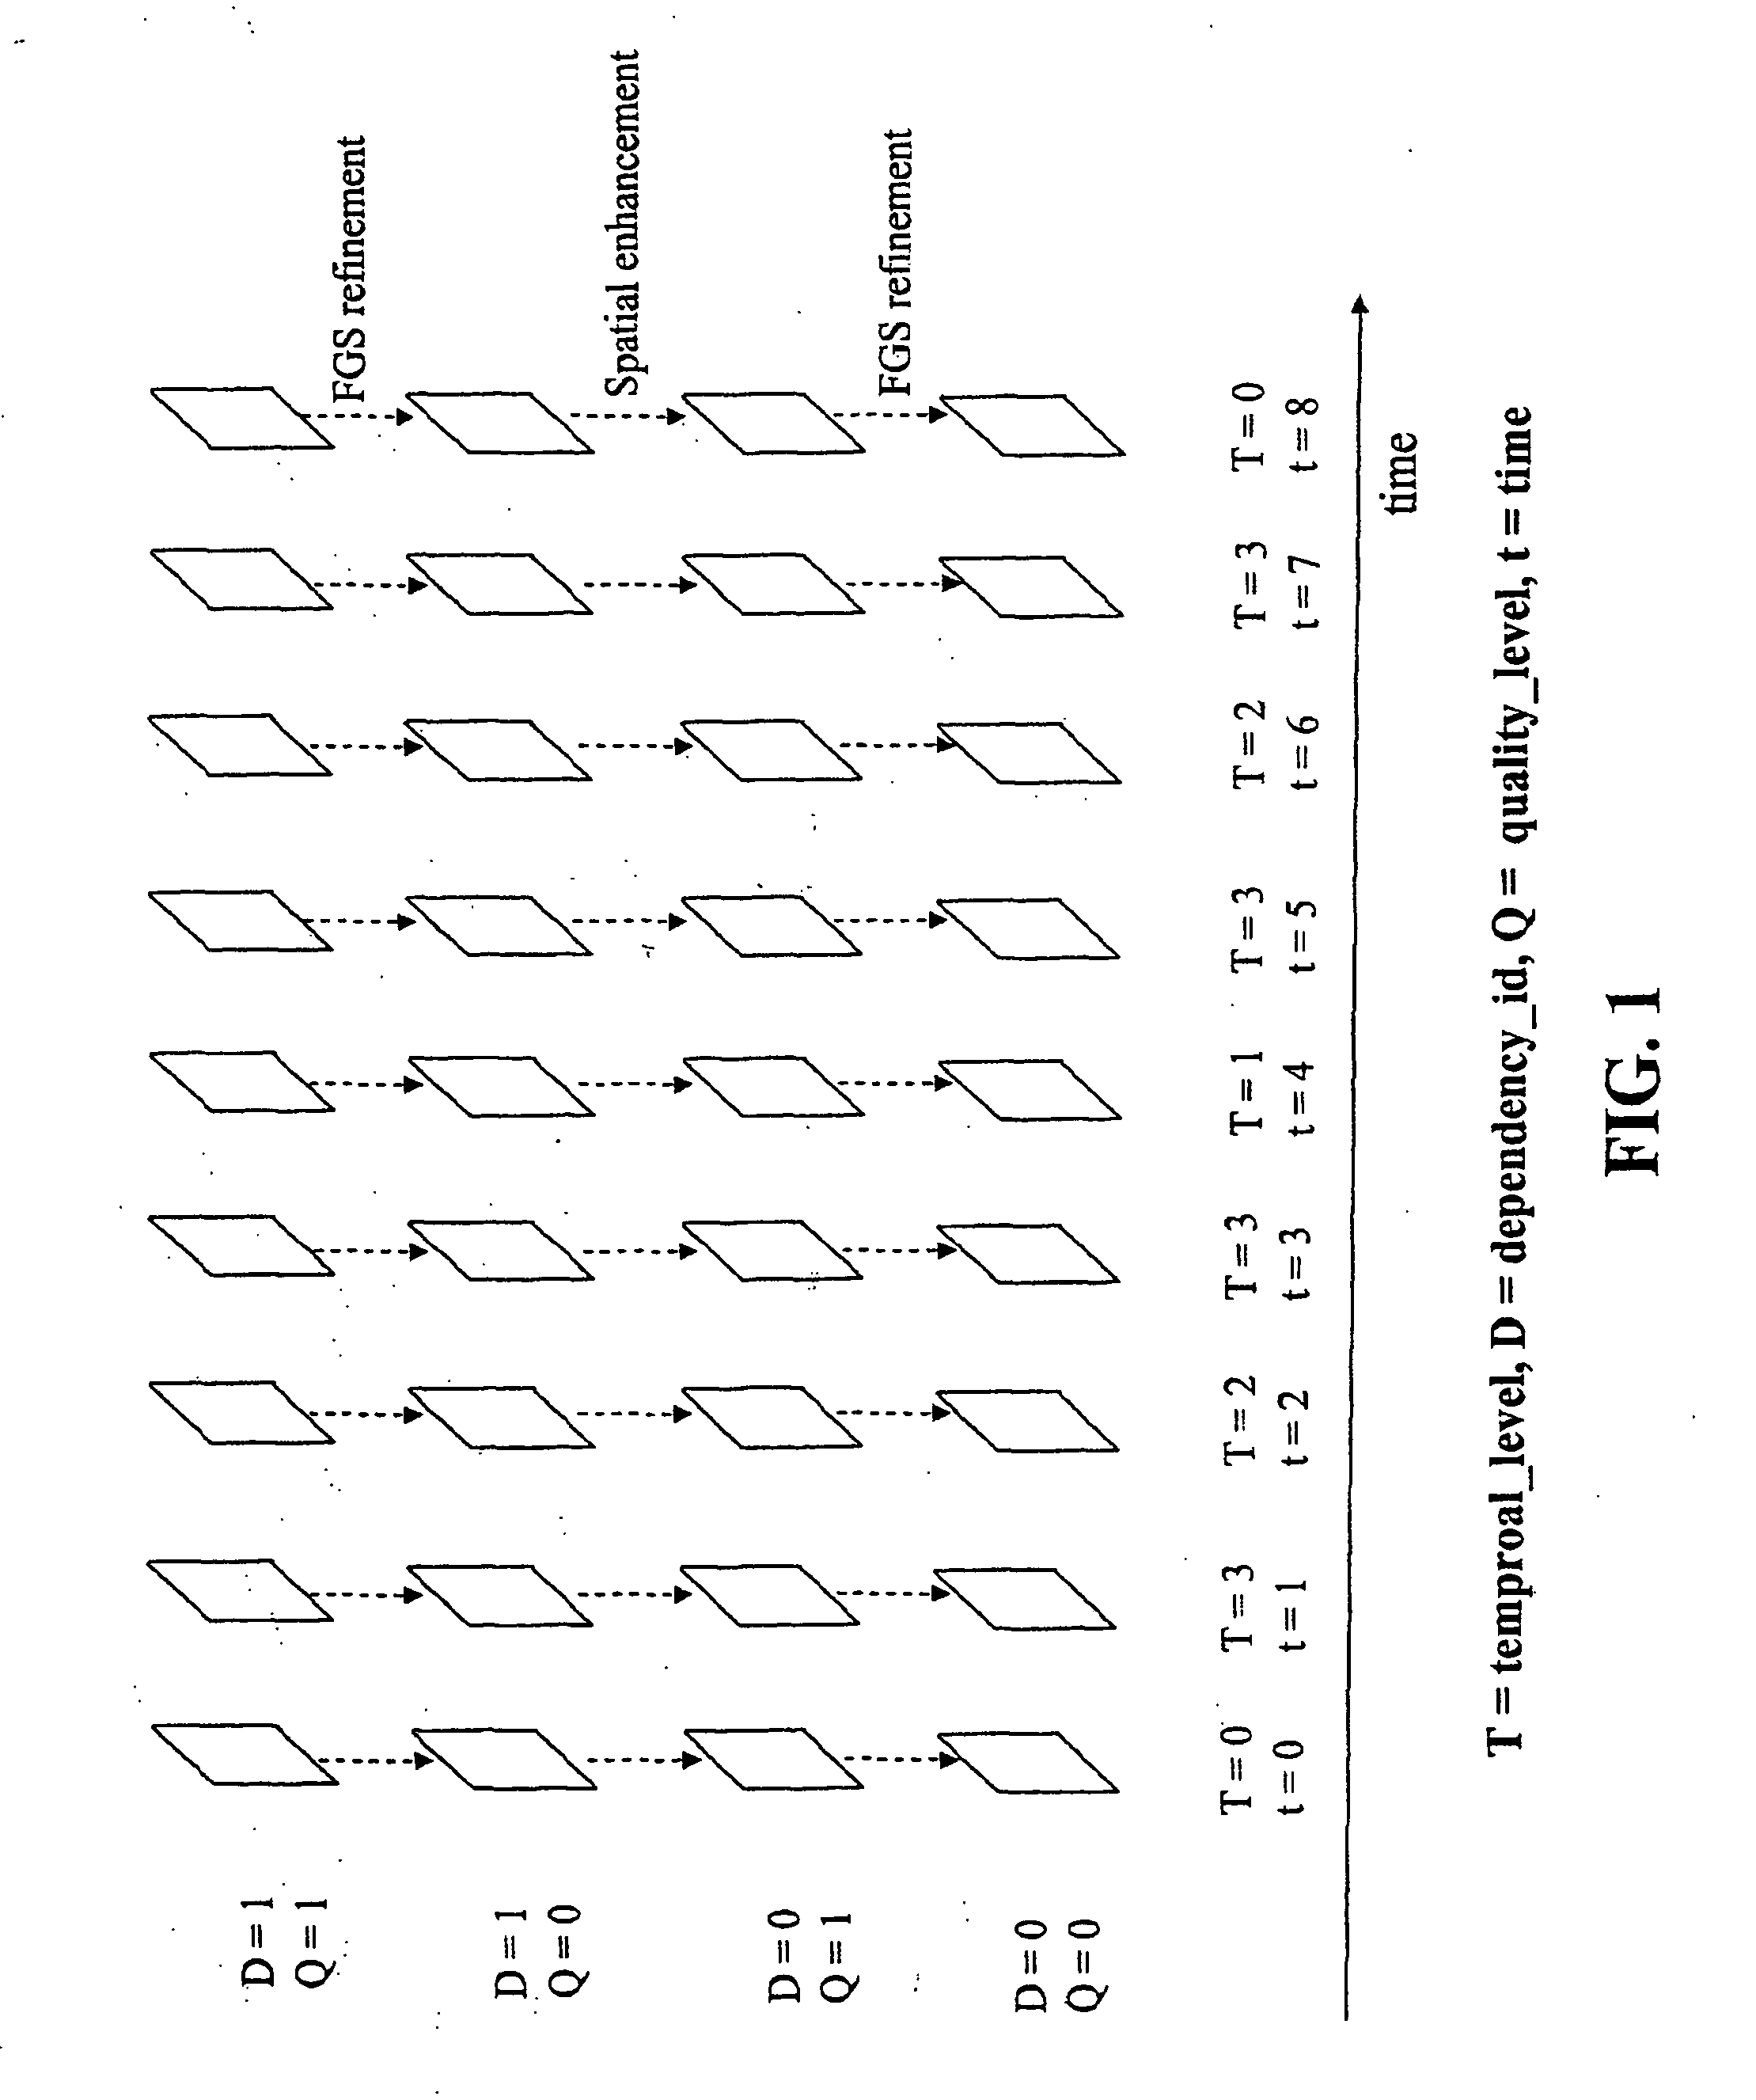 System and method for efficient scalable stream adaptation